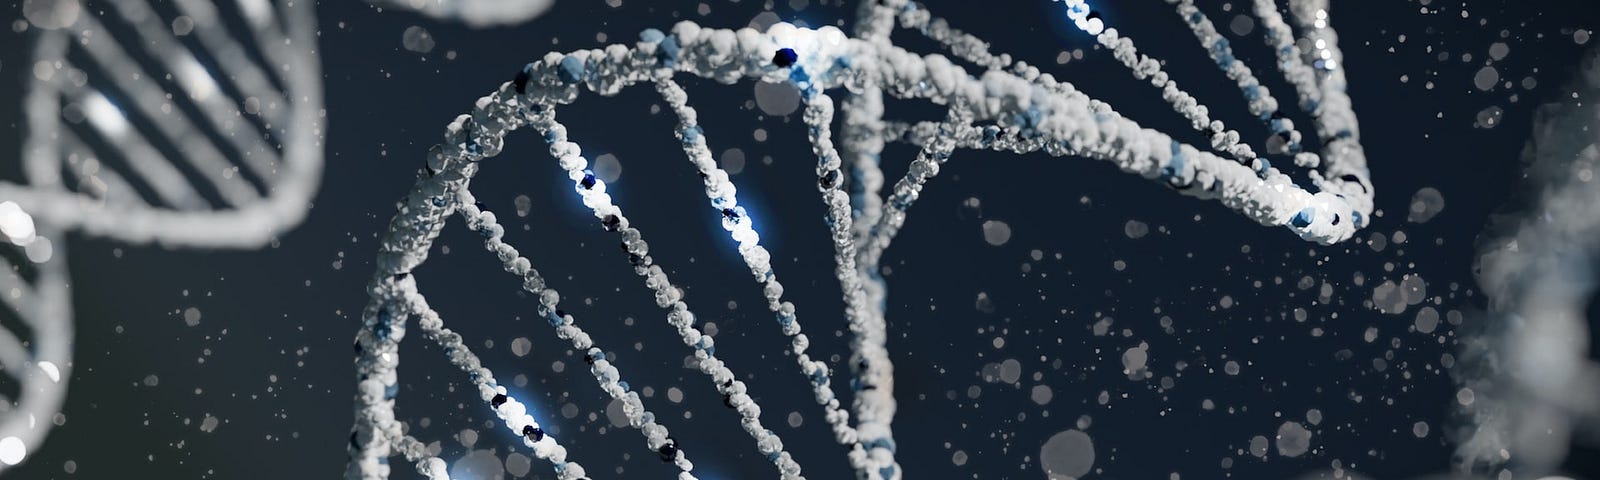 IMAGE: An image of the DNA double helix